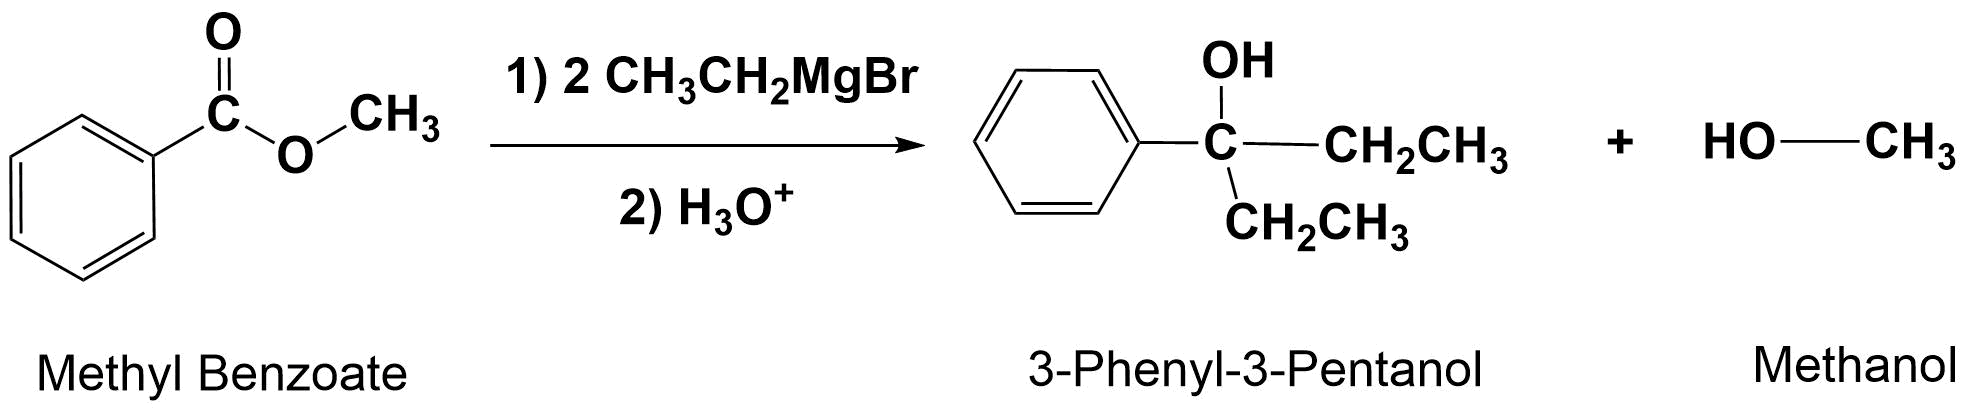 Example Grignard Reaction.png